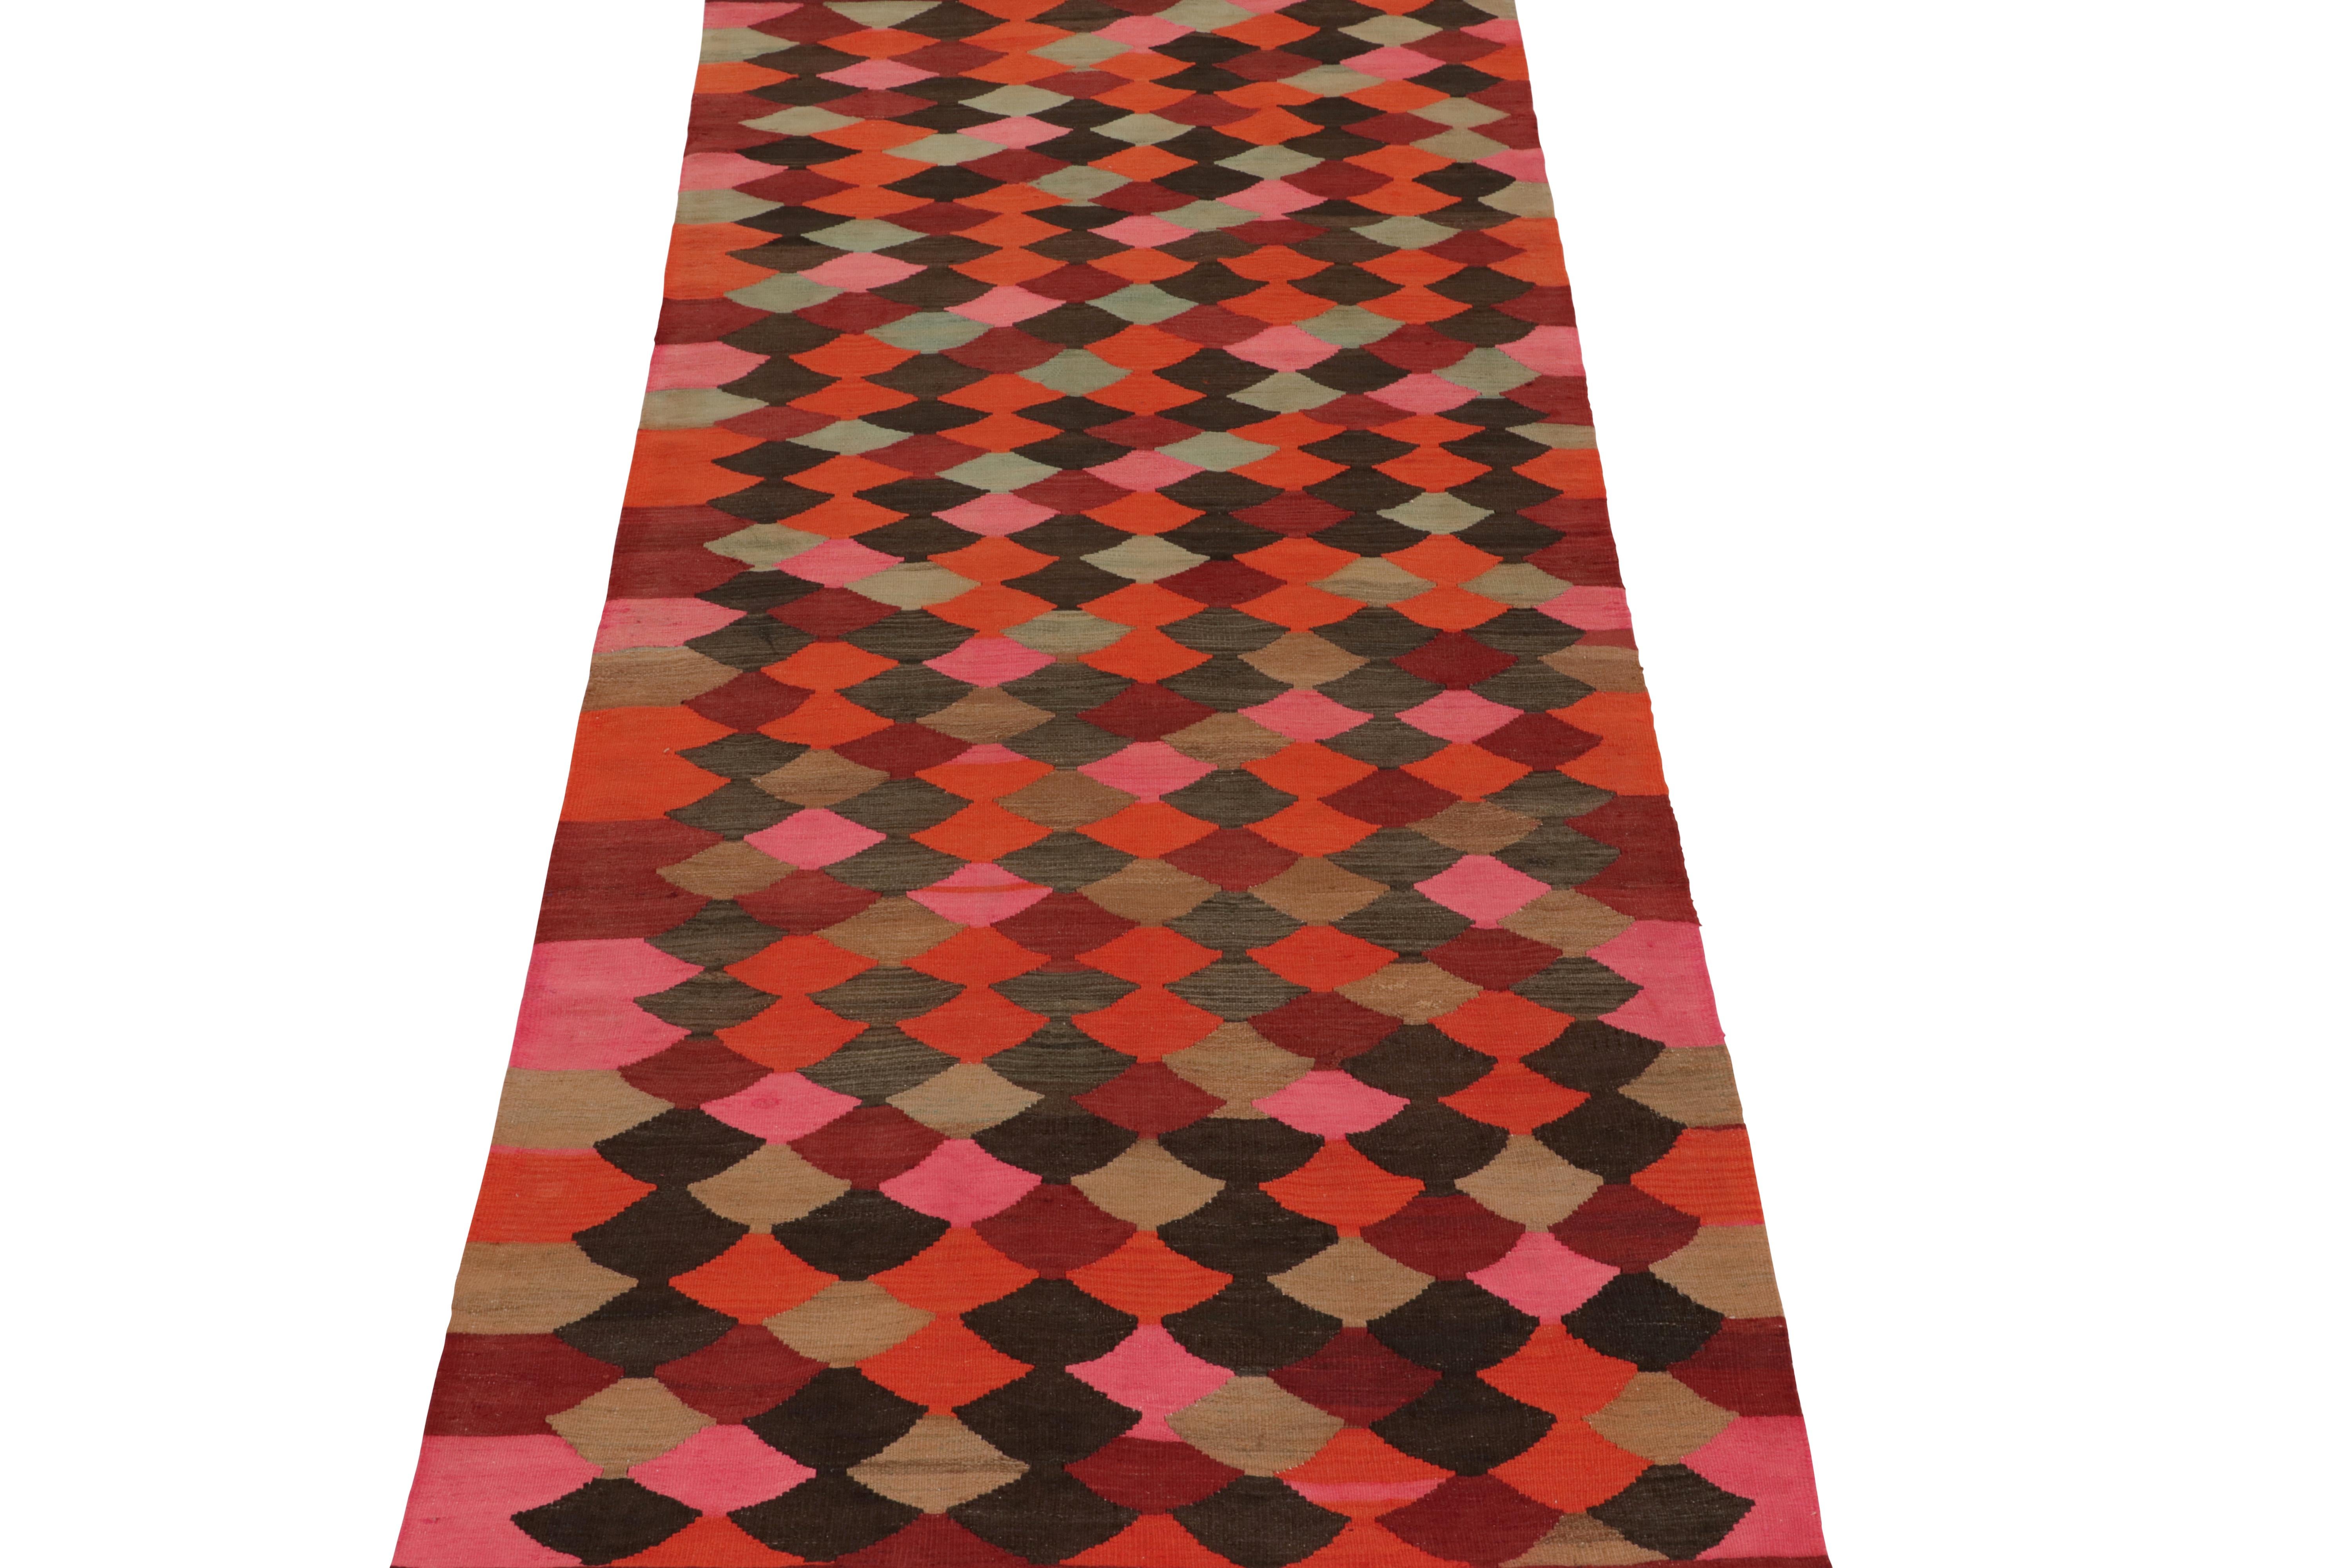 This vintage 4x9 Persian Kilim hails from the mountainous Karadagh regions of Iran, and enjoys a vibrant polychromatic design. Handwoven in wool, it originates circa 1950-1960.

Further On the Design: 

This runner enjoys an all over geometric